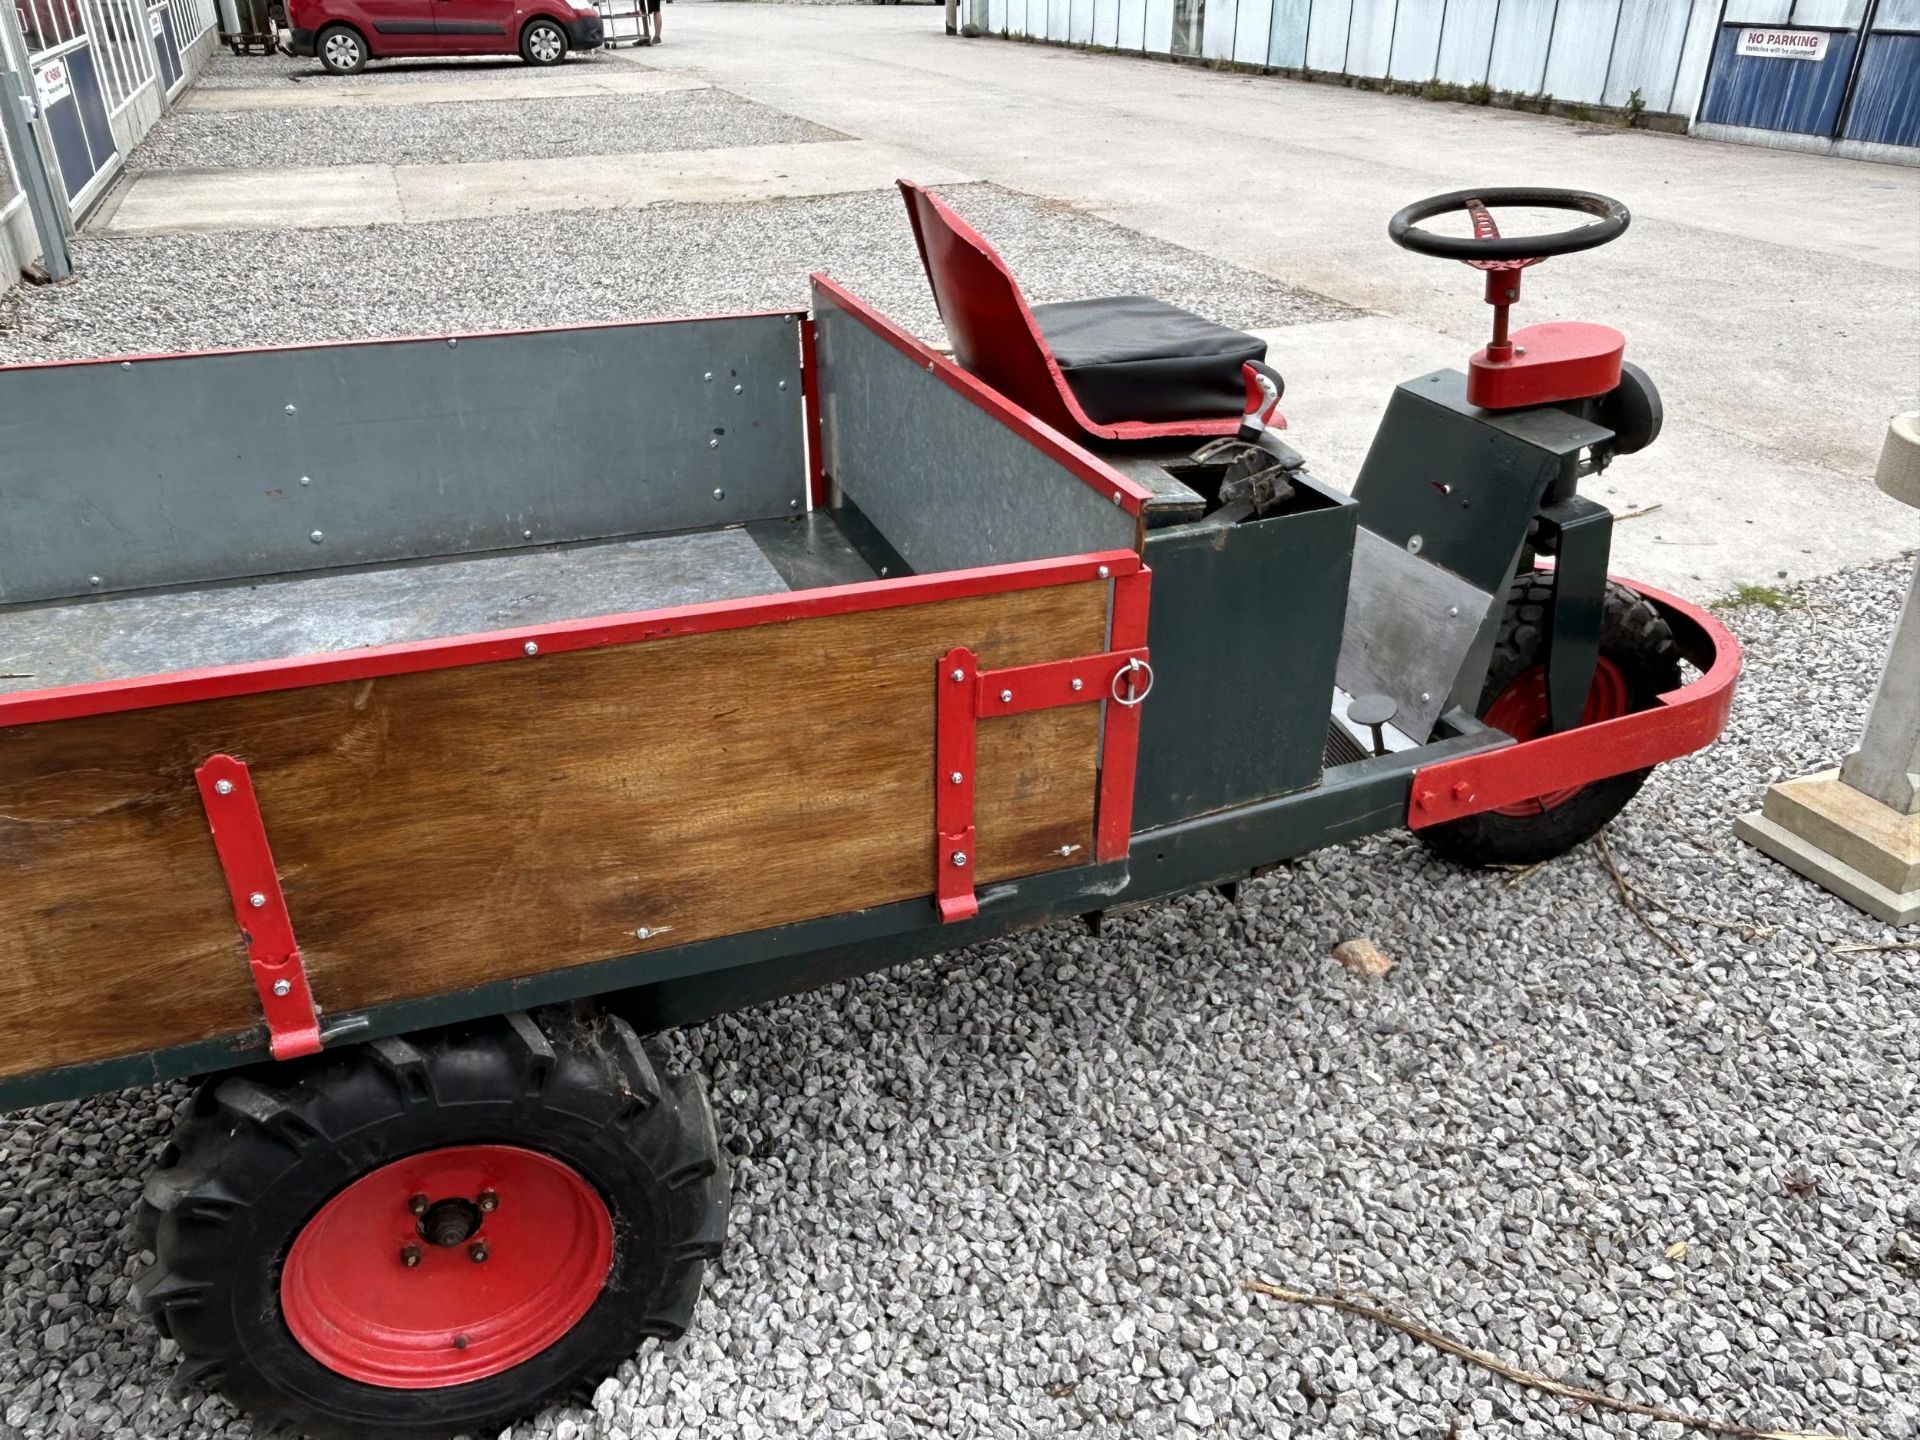 A PETROL ENGINE 'MARTIN TRUCKS BE2' MARKET GARDENERS TRICYCLE WITH MANUAL TIPPER BODY (REQUIRES A - Image 9 of 10